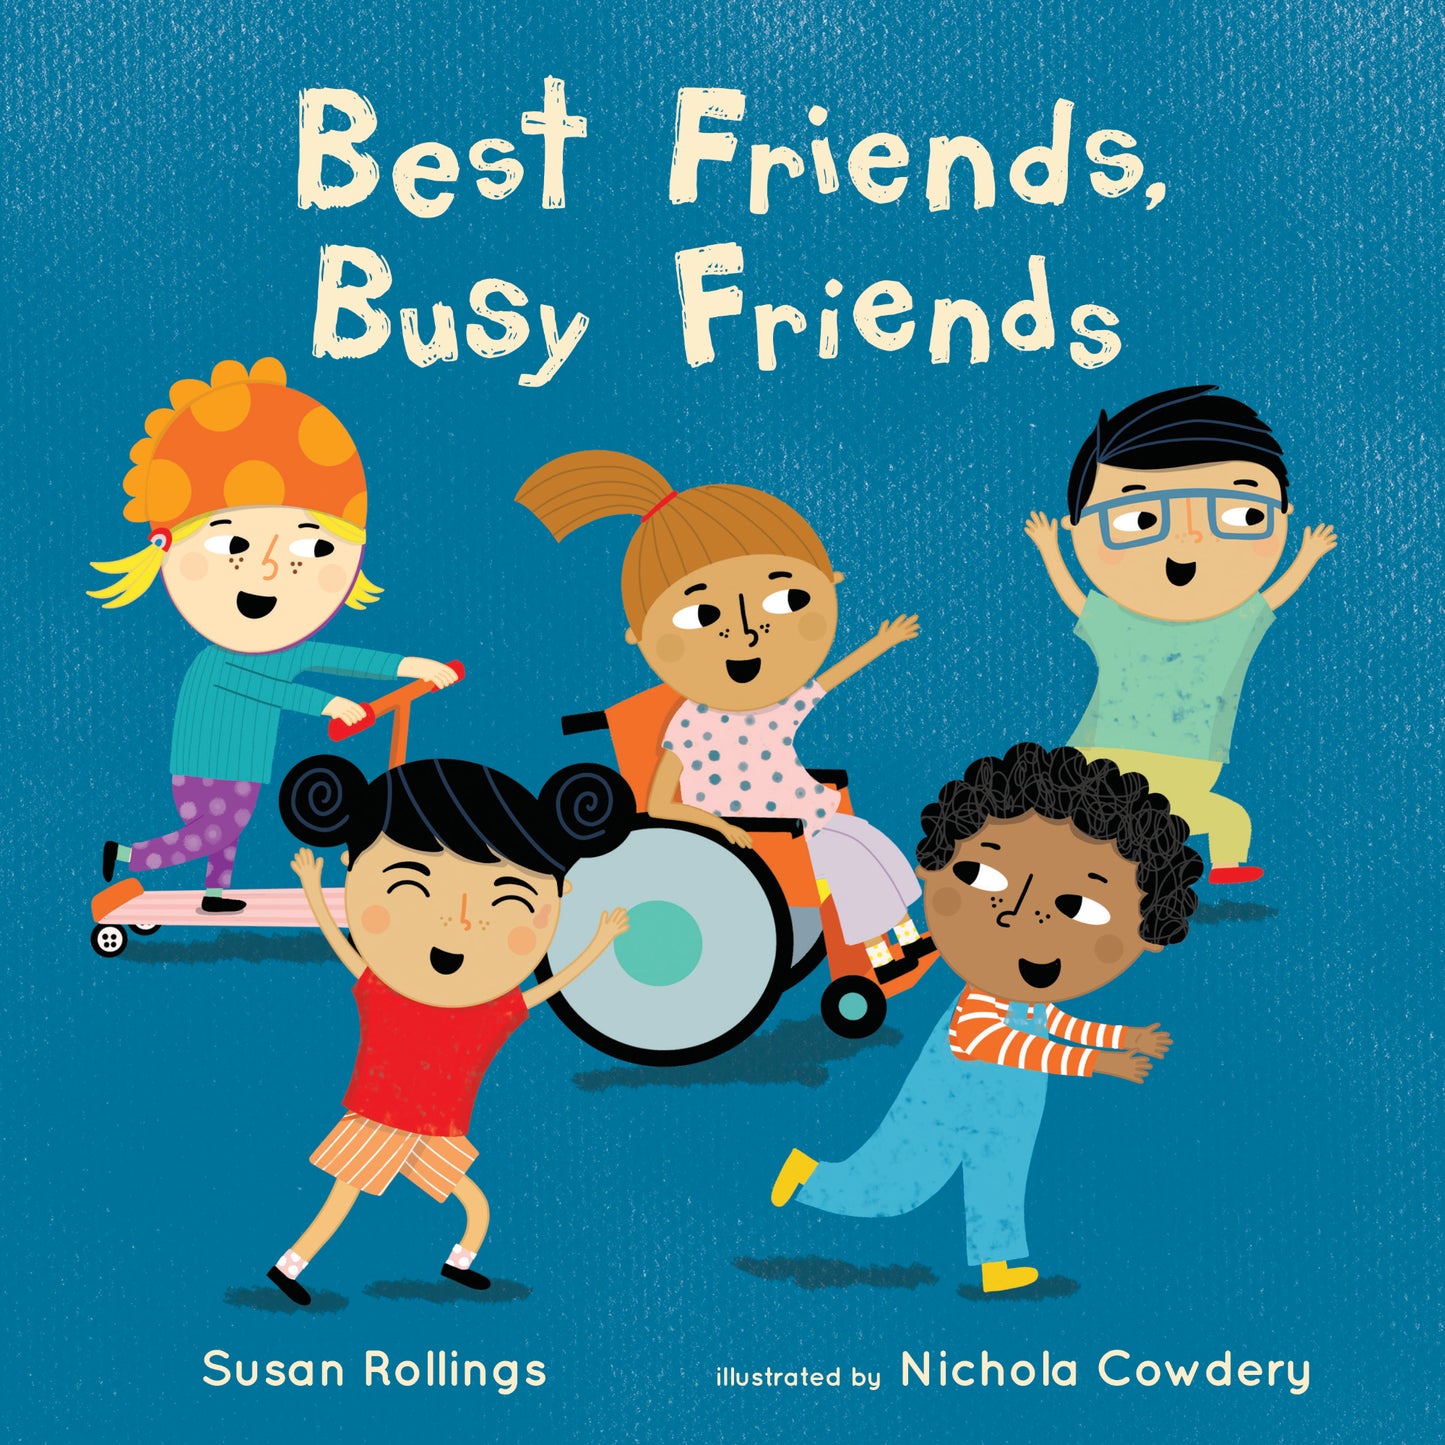 Best Friends, Busy Friends (Softcover Edition)